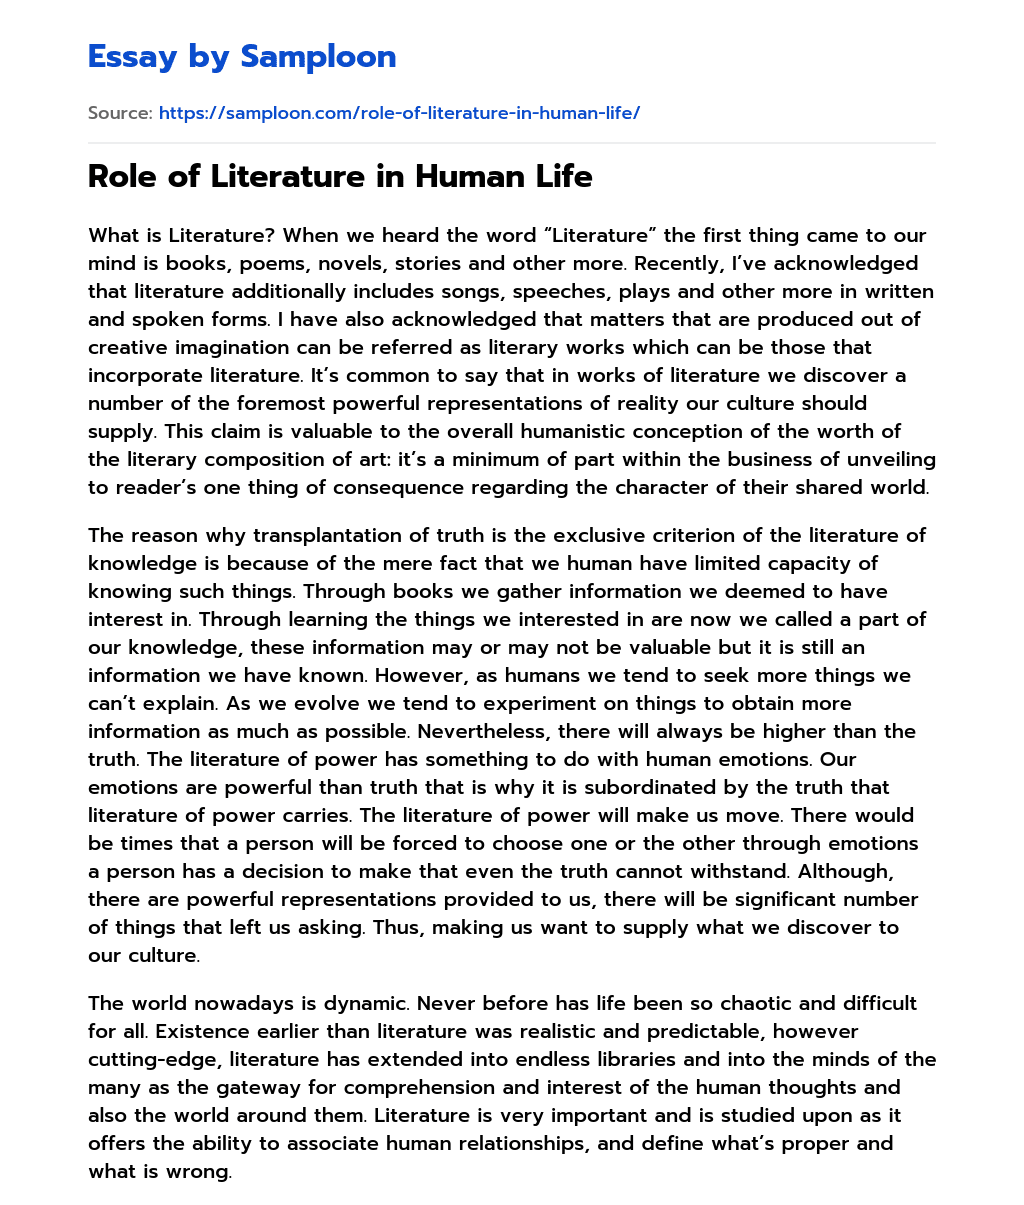 Role of Literature in Human Life essay